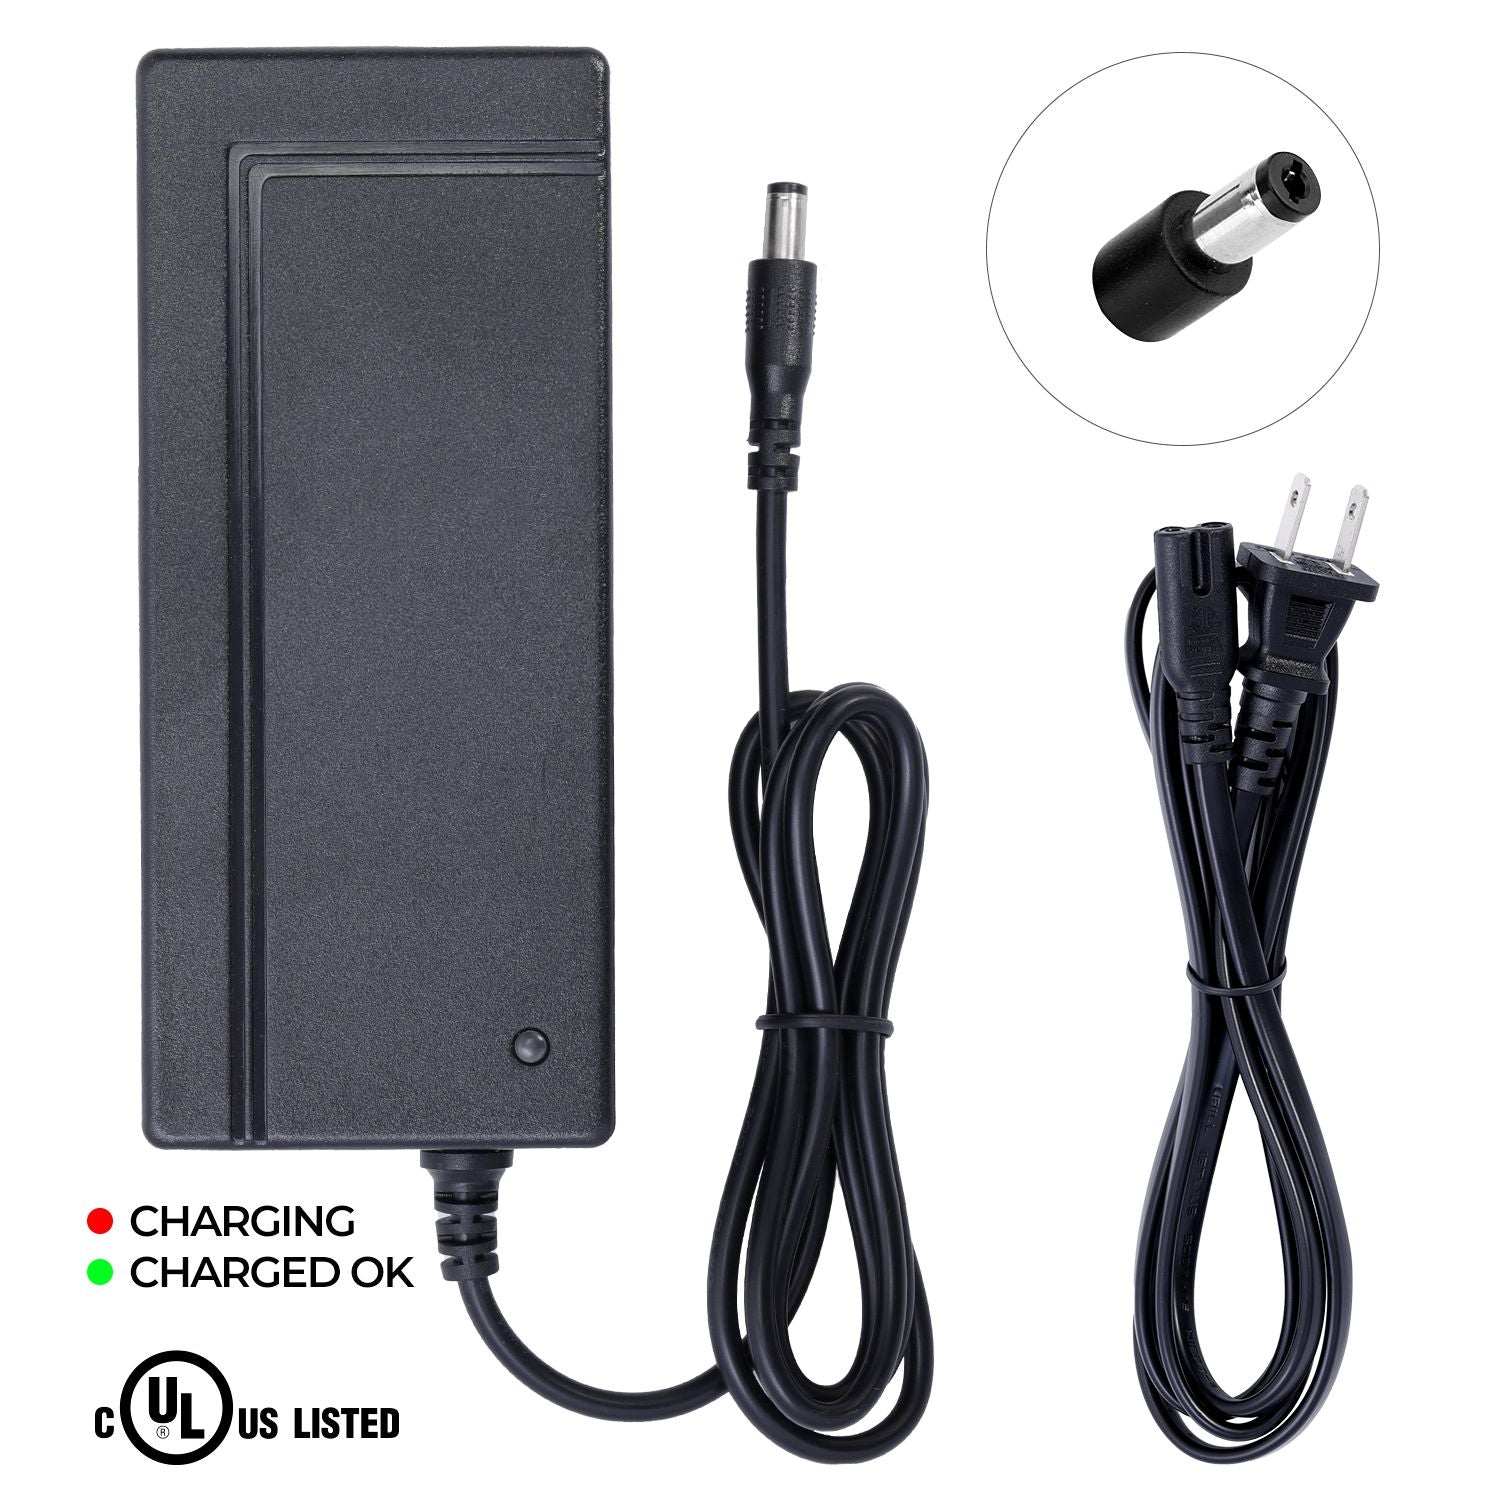 Charger for Gocycle G4i eBike